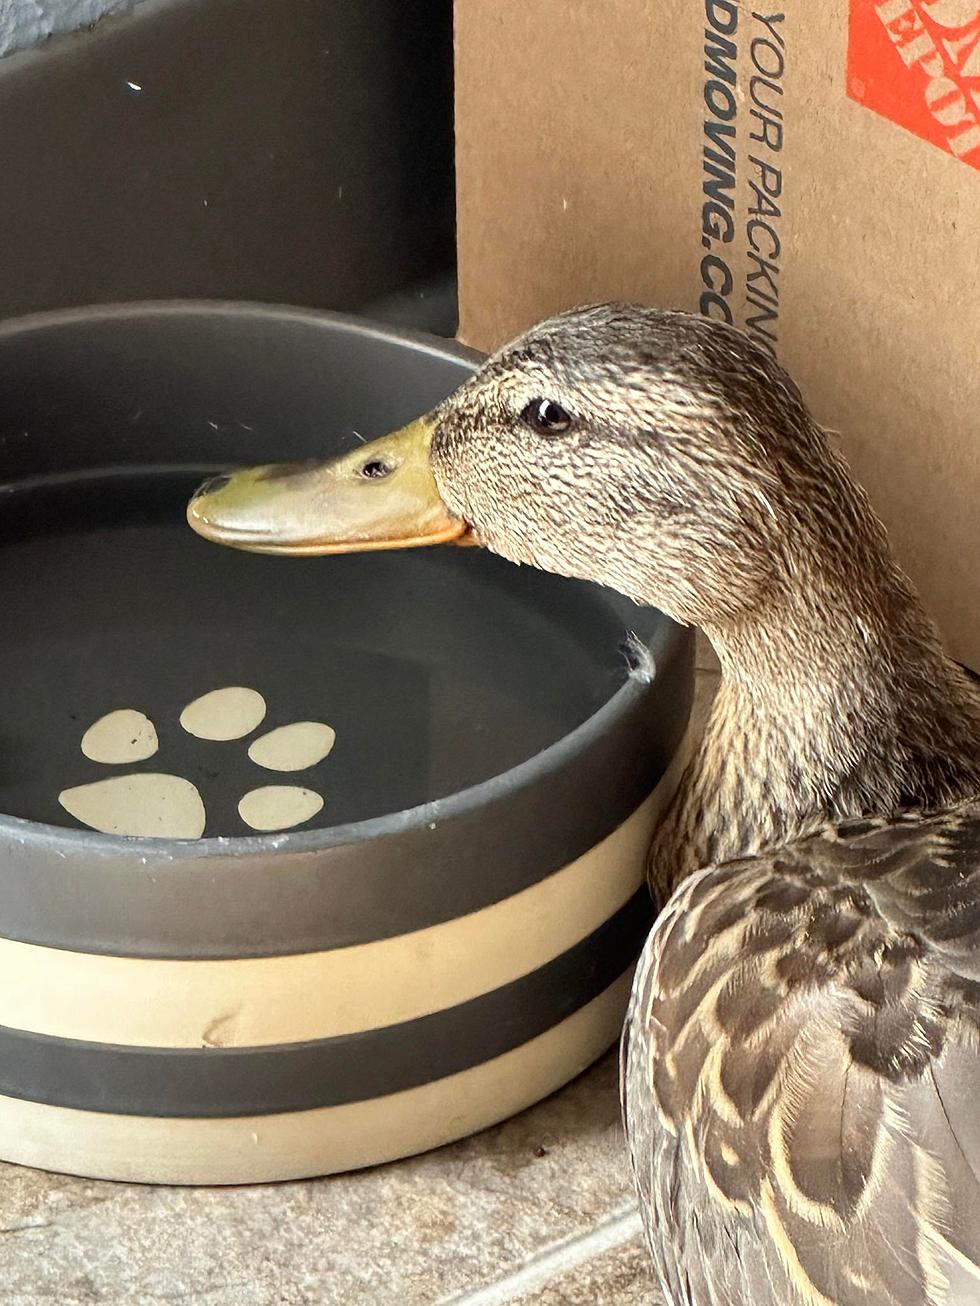 Yakima Man Adopts Helpless Injured Duck After Finding It Tuesday